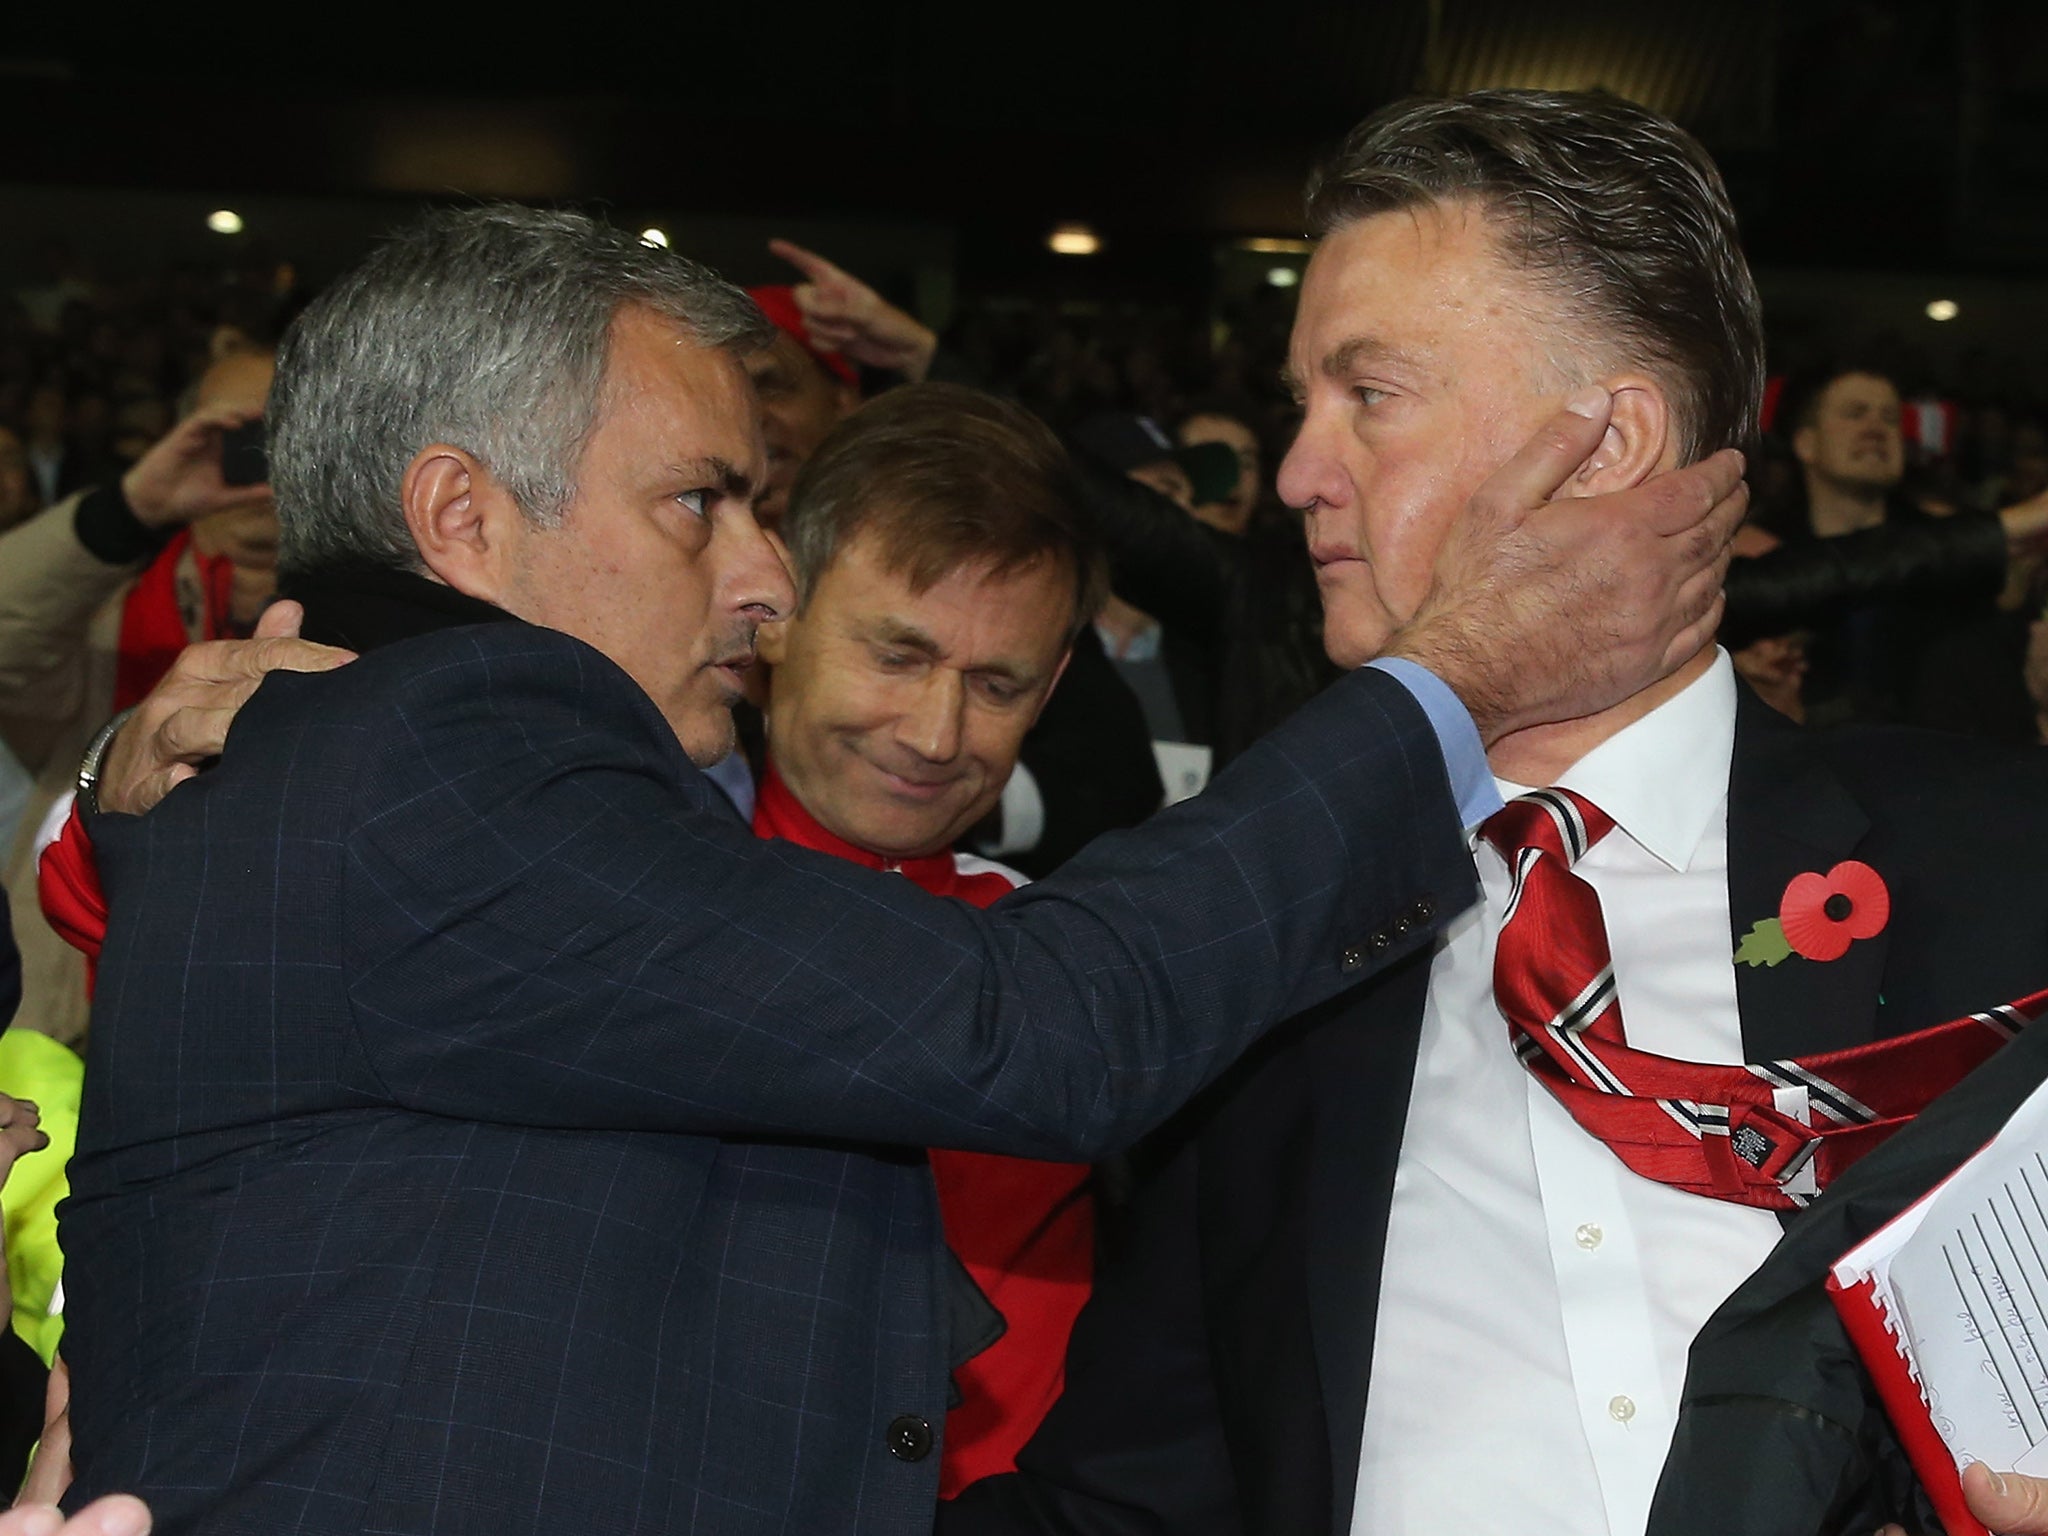 Louis van Gaal was removed from his post days after lifting Manchester United's 12th FA Cup